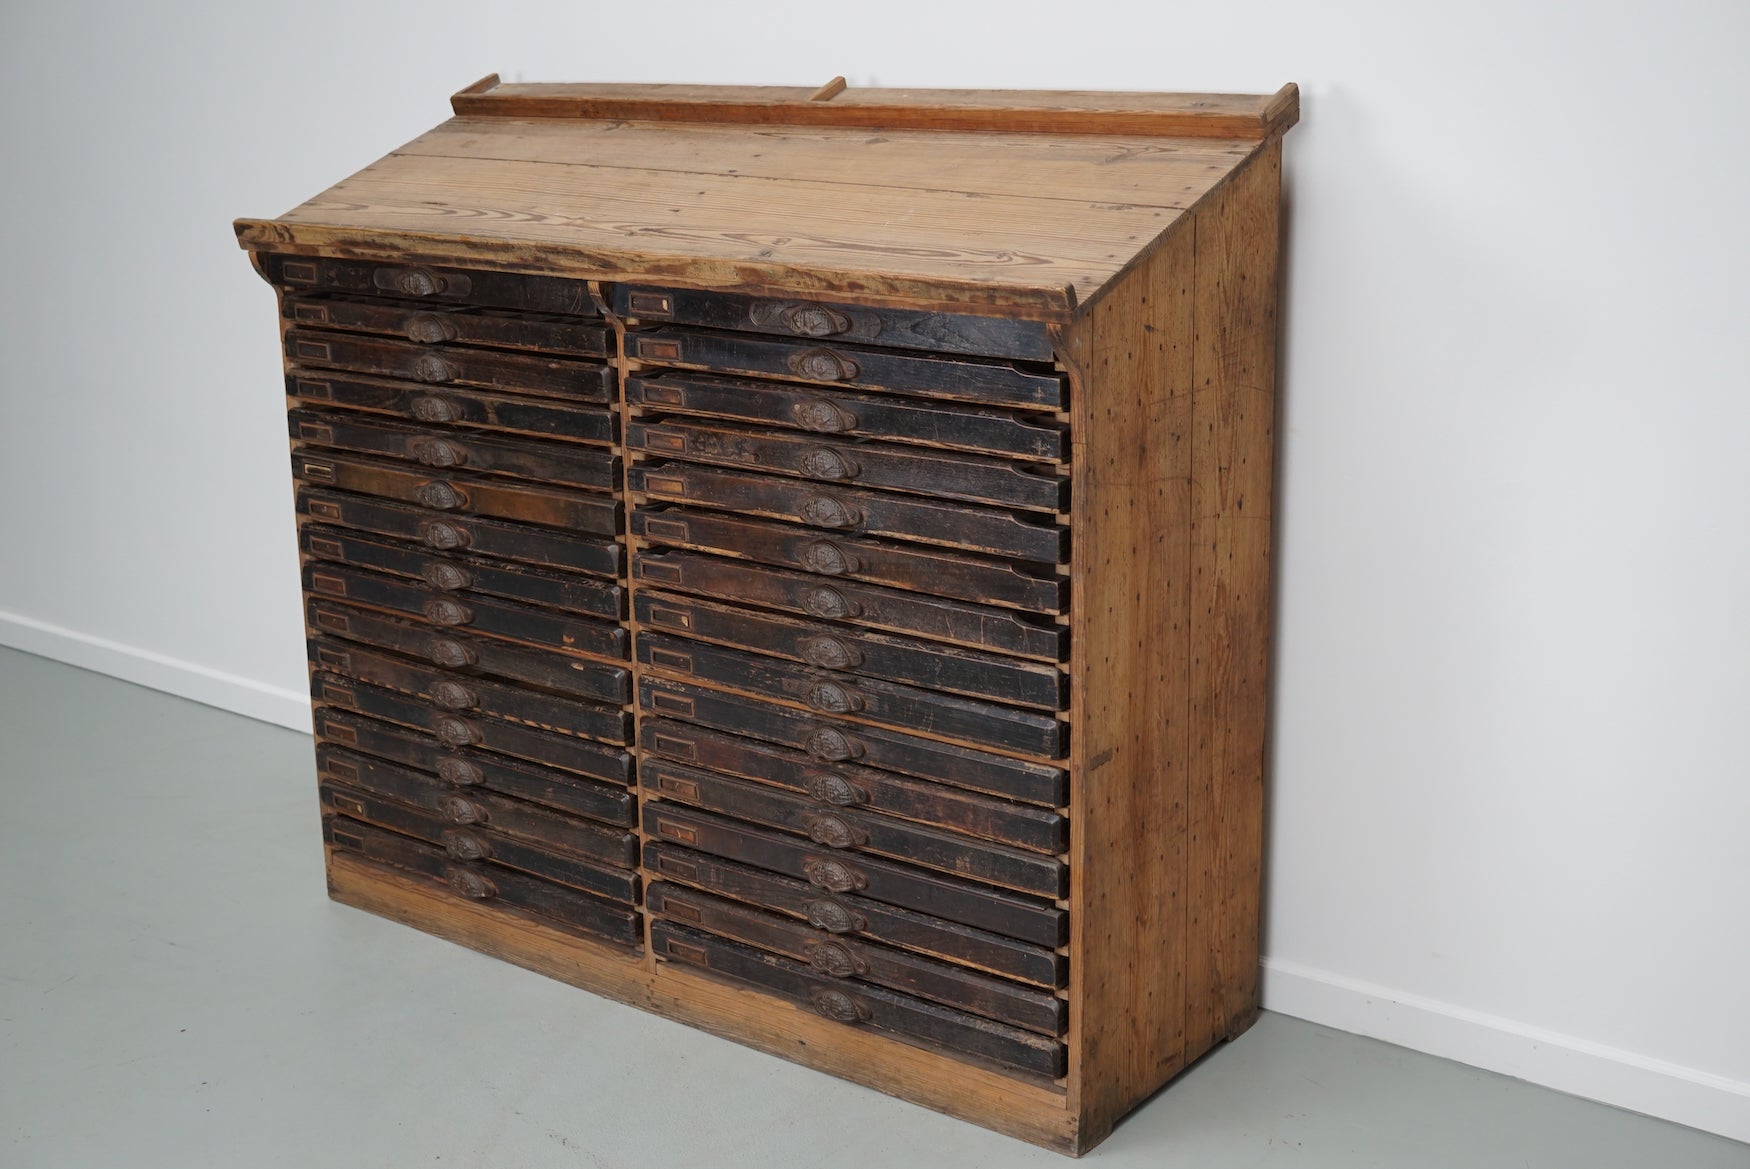 These printer drawers were made in the early 20th century in France from pine and beech with stunning original cast iron cup handles. Most of the drawers have dividers. The interior dimensions of the drawers are: D 41 x W 61 x H 4 cm.